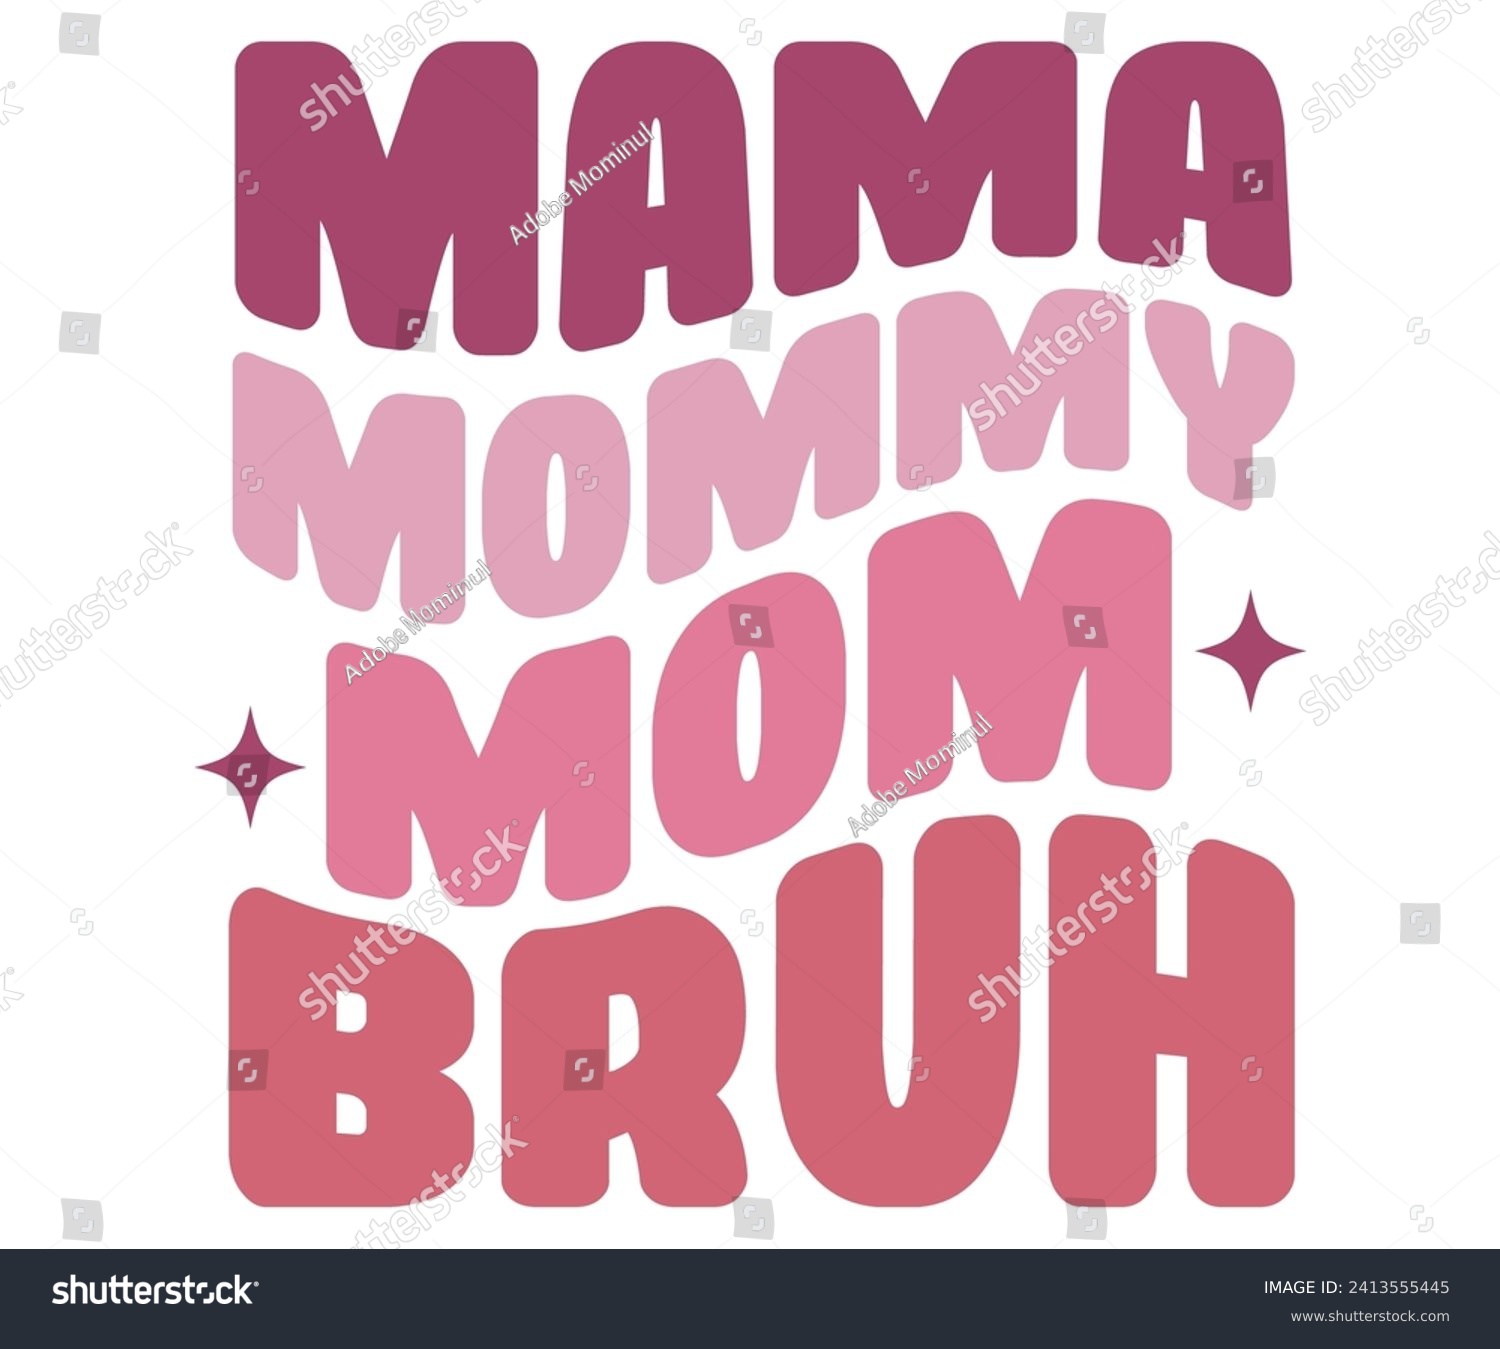 SVG of Mama Mommy Mom Bruh Svg,Mothers Day Svg,Png,Mom Quotes Svg,Funny Mom Svg,Gift For Mom Svg,Mom life Svg,Mama Svg,Mommy T-shirt Design,Svg Cut File,Dog Mom deisn,Retro Groovy,Auntie T-shirt Design, svg